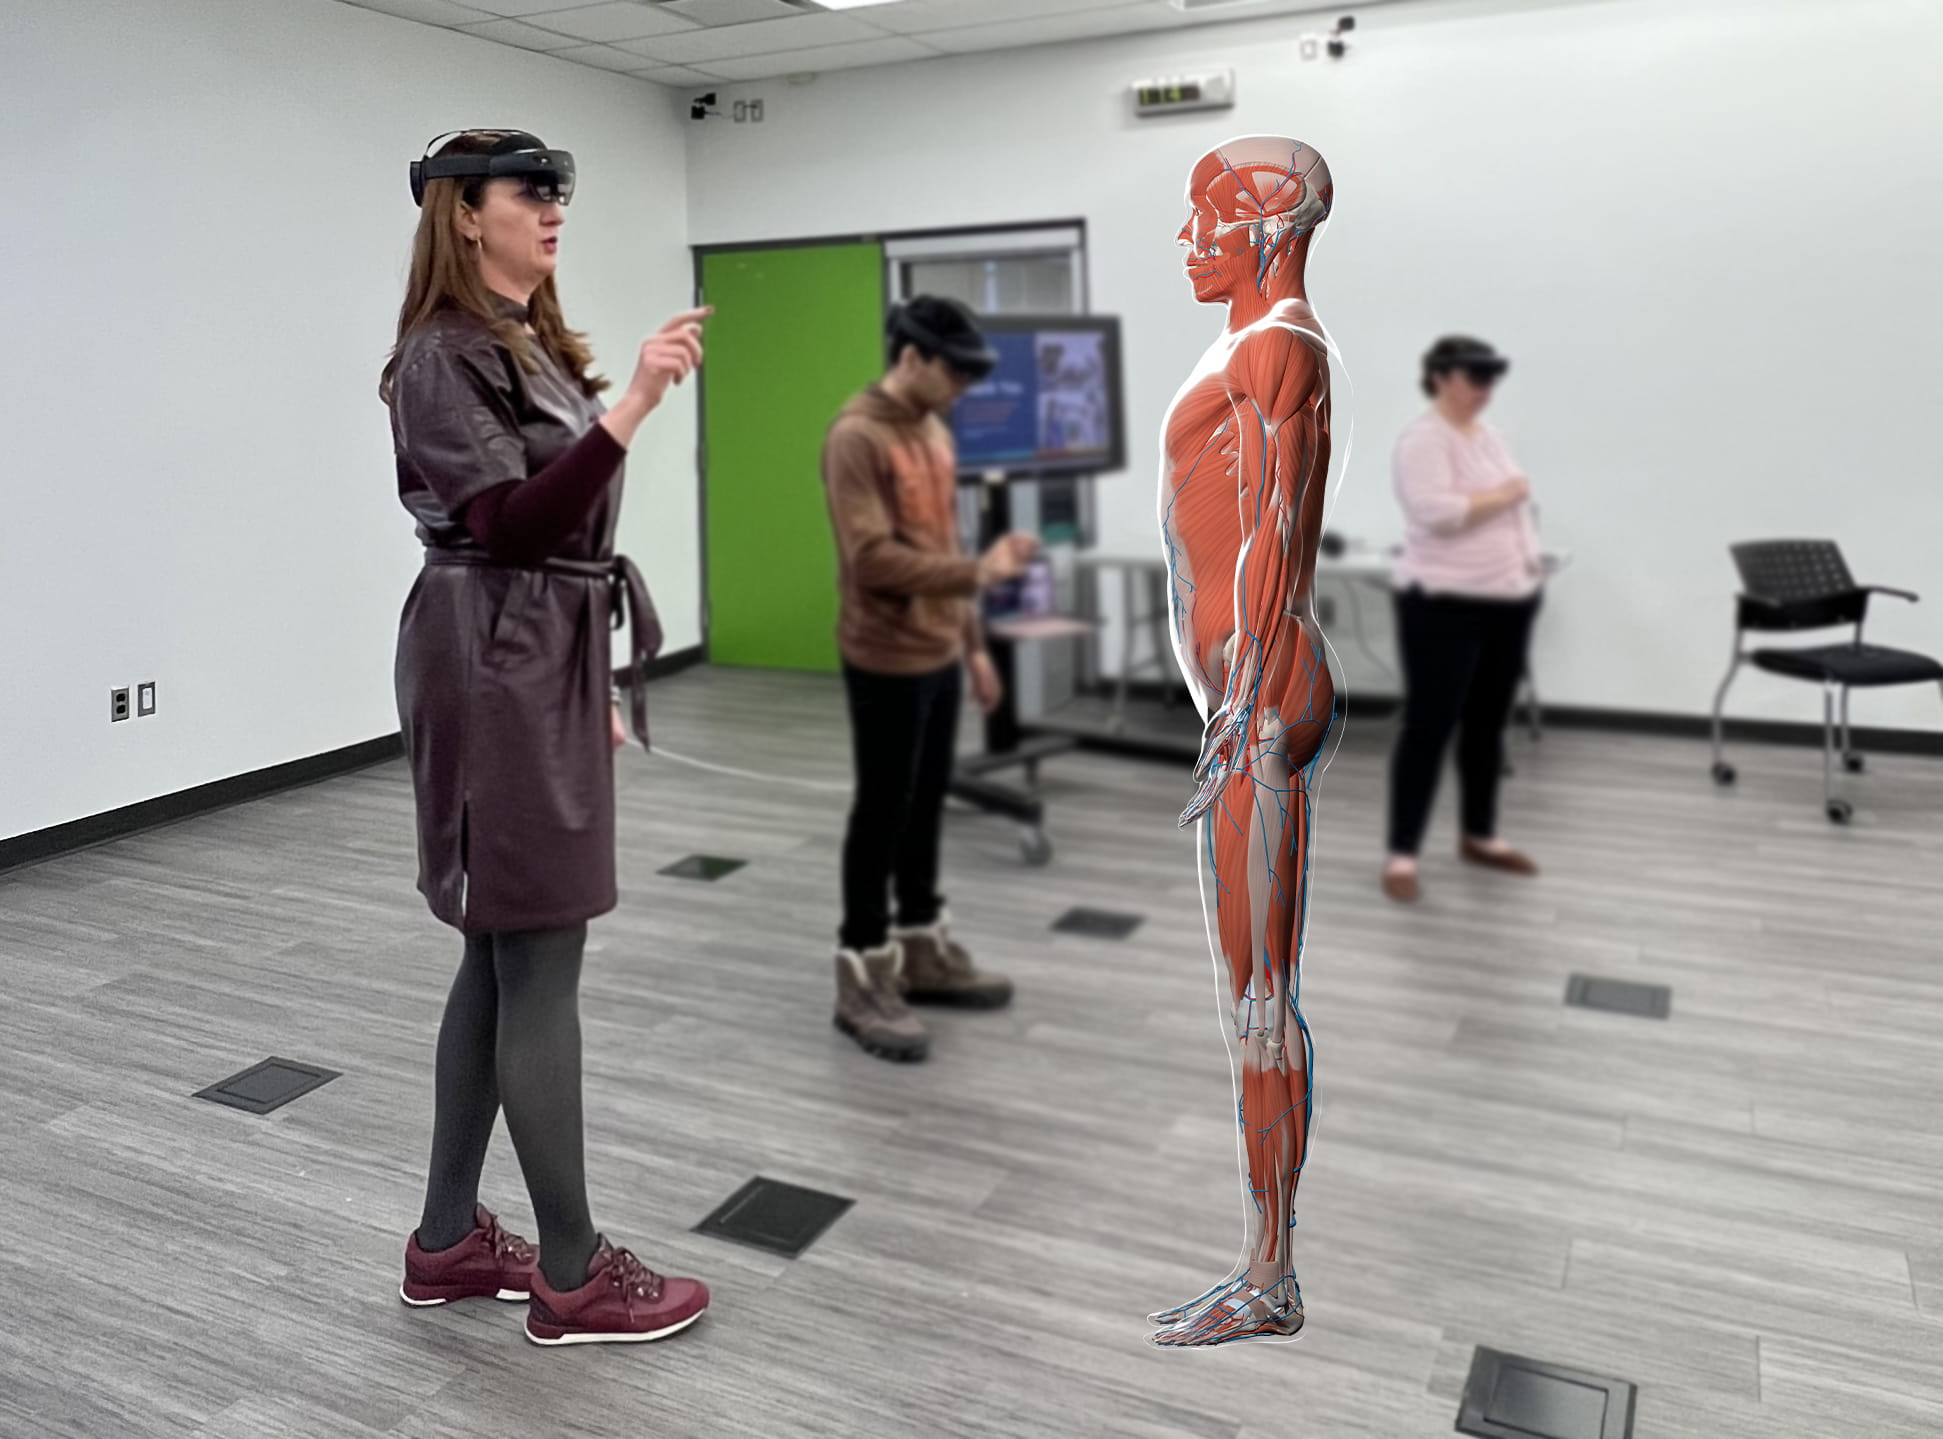 A Sheridan administrator uses the HoloAnatomy 3D mixed reality software to view a holographic imagery of a body.